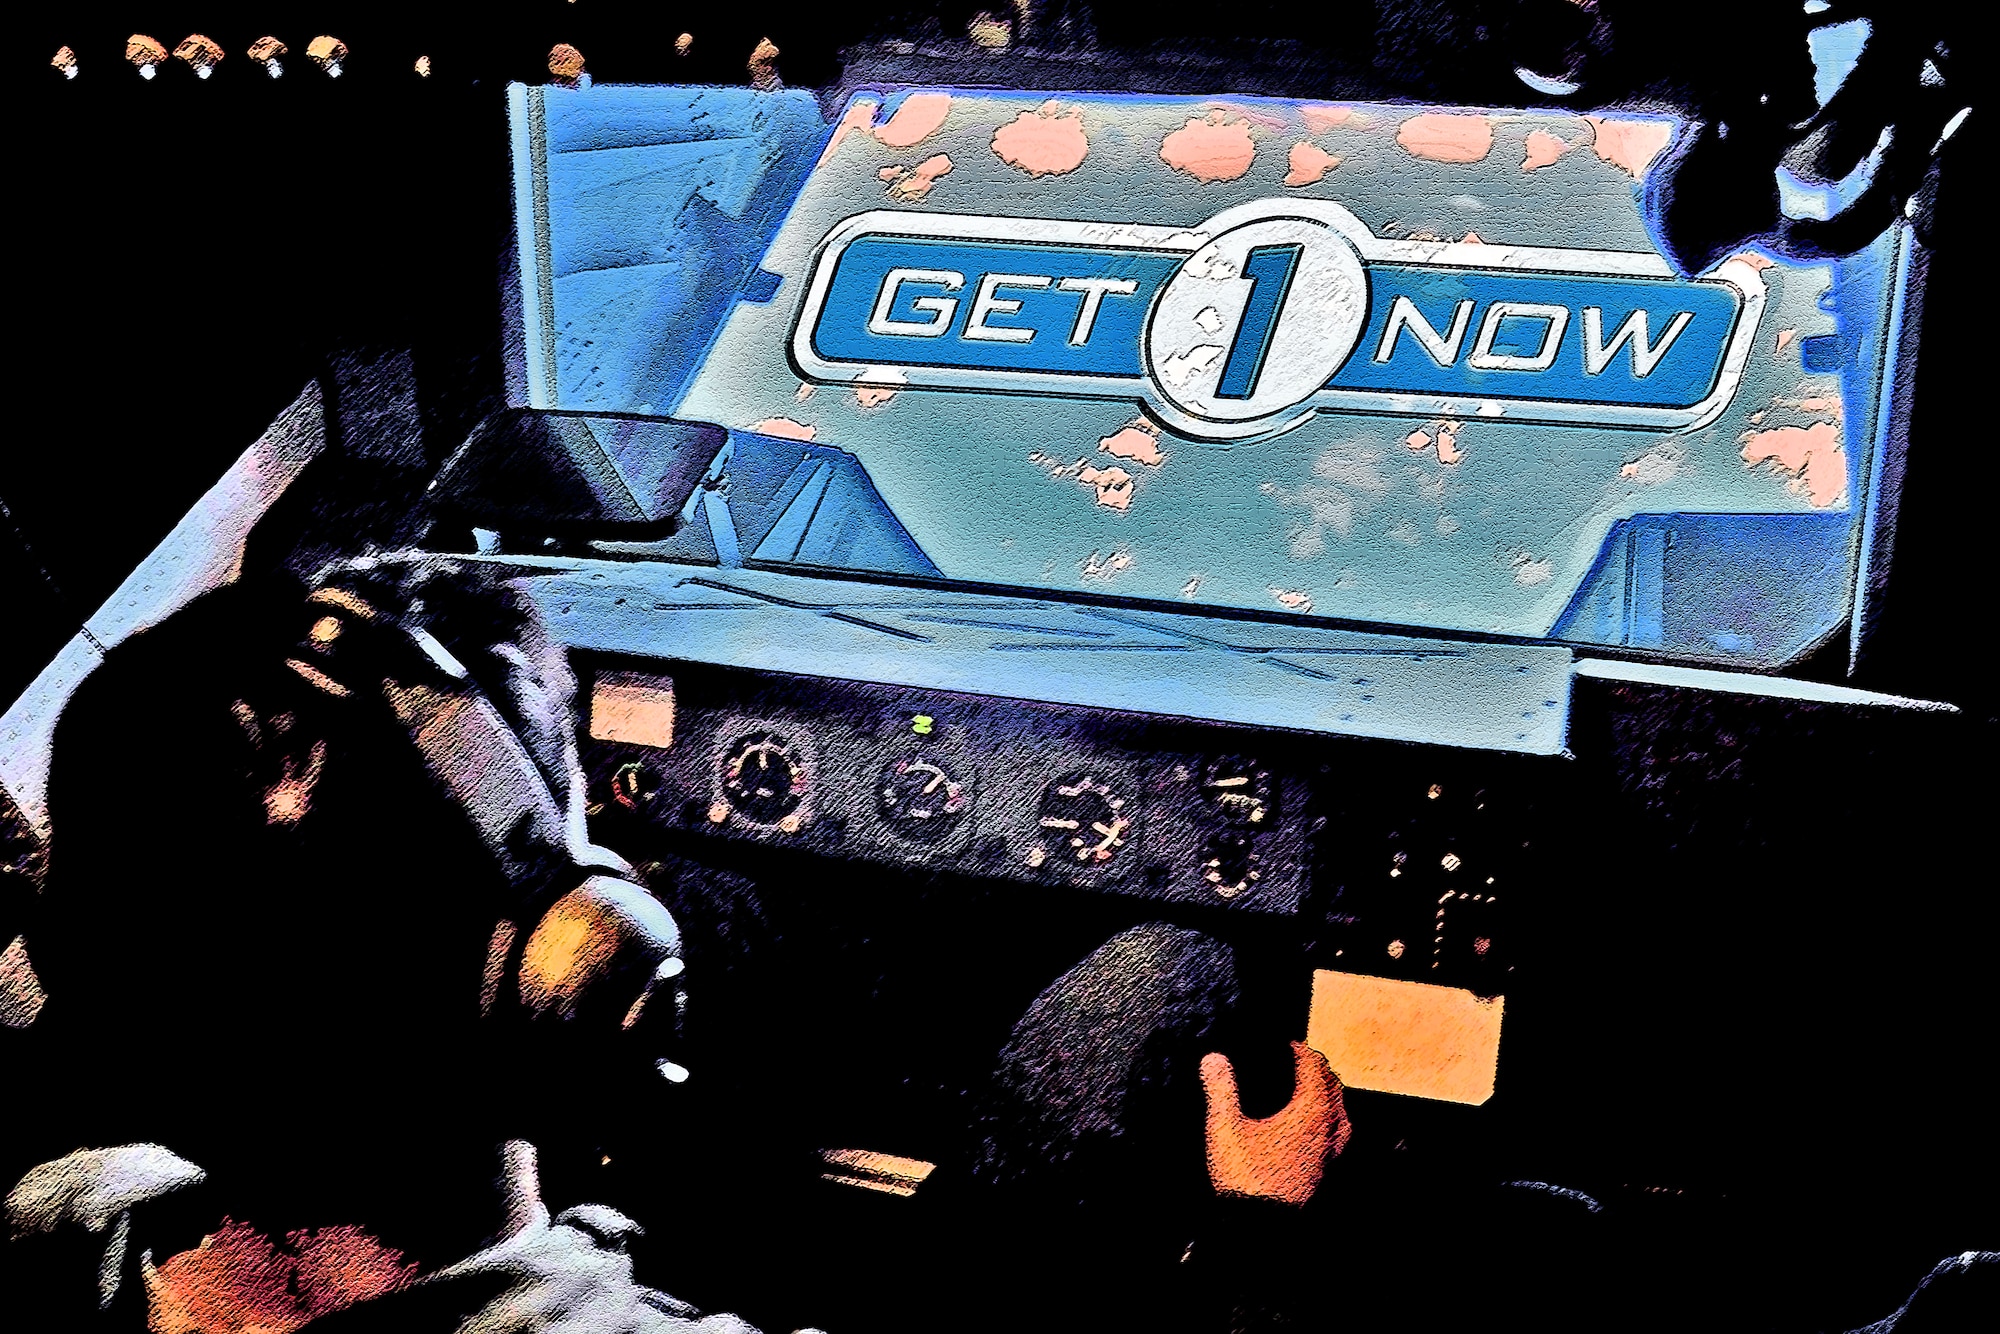 The Get1Now program, an incentive program managed by the Air Force Reserve Command Recruiting Service, rewards current Airmen for referring qualified candidates to a recruiter. One of the key benefits of the program is that it allows Citizen Airmen to play a direct role in deciding who will make up the future of the Air Force Reserve. (U.S. Air Force illustration by Master Sgt. Shawn J. Jones)